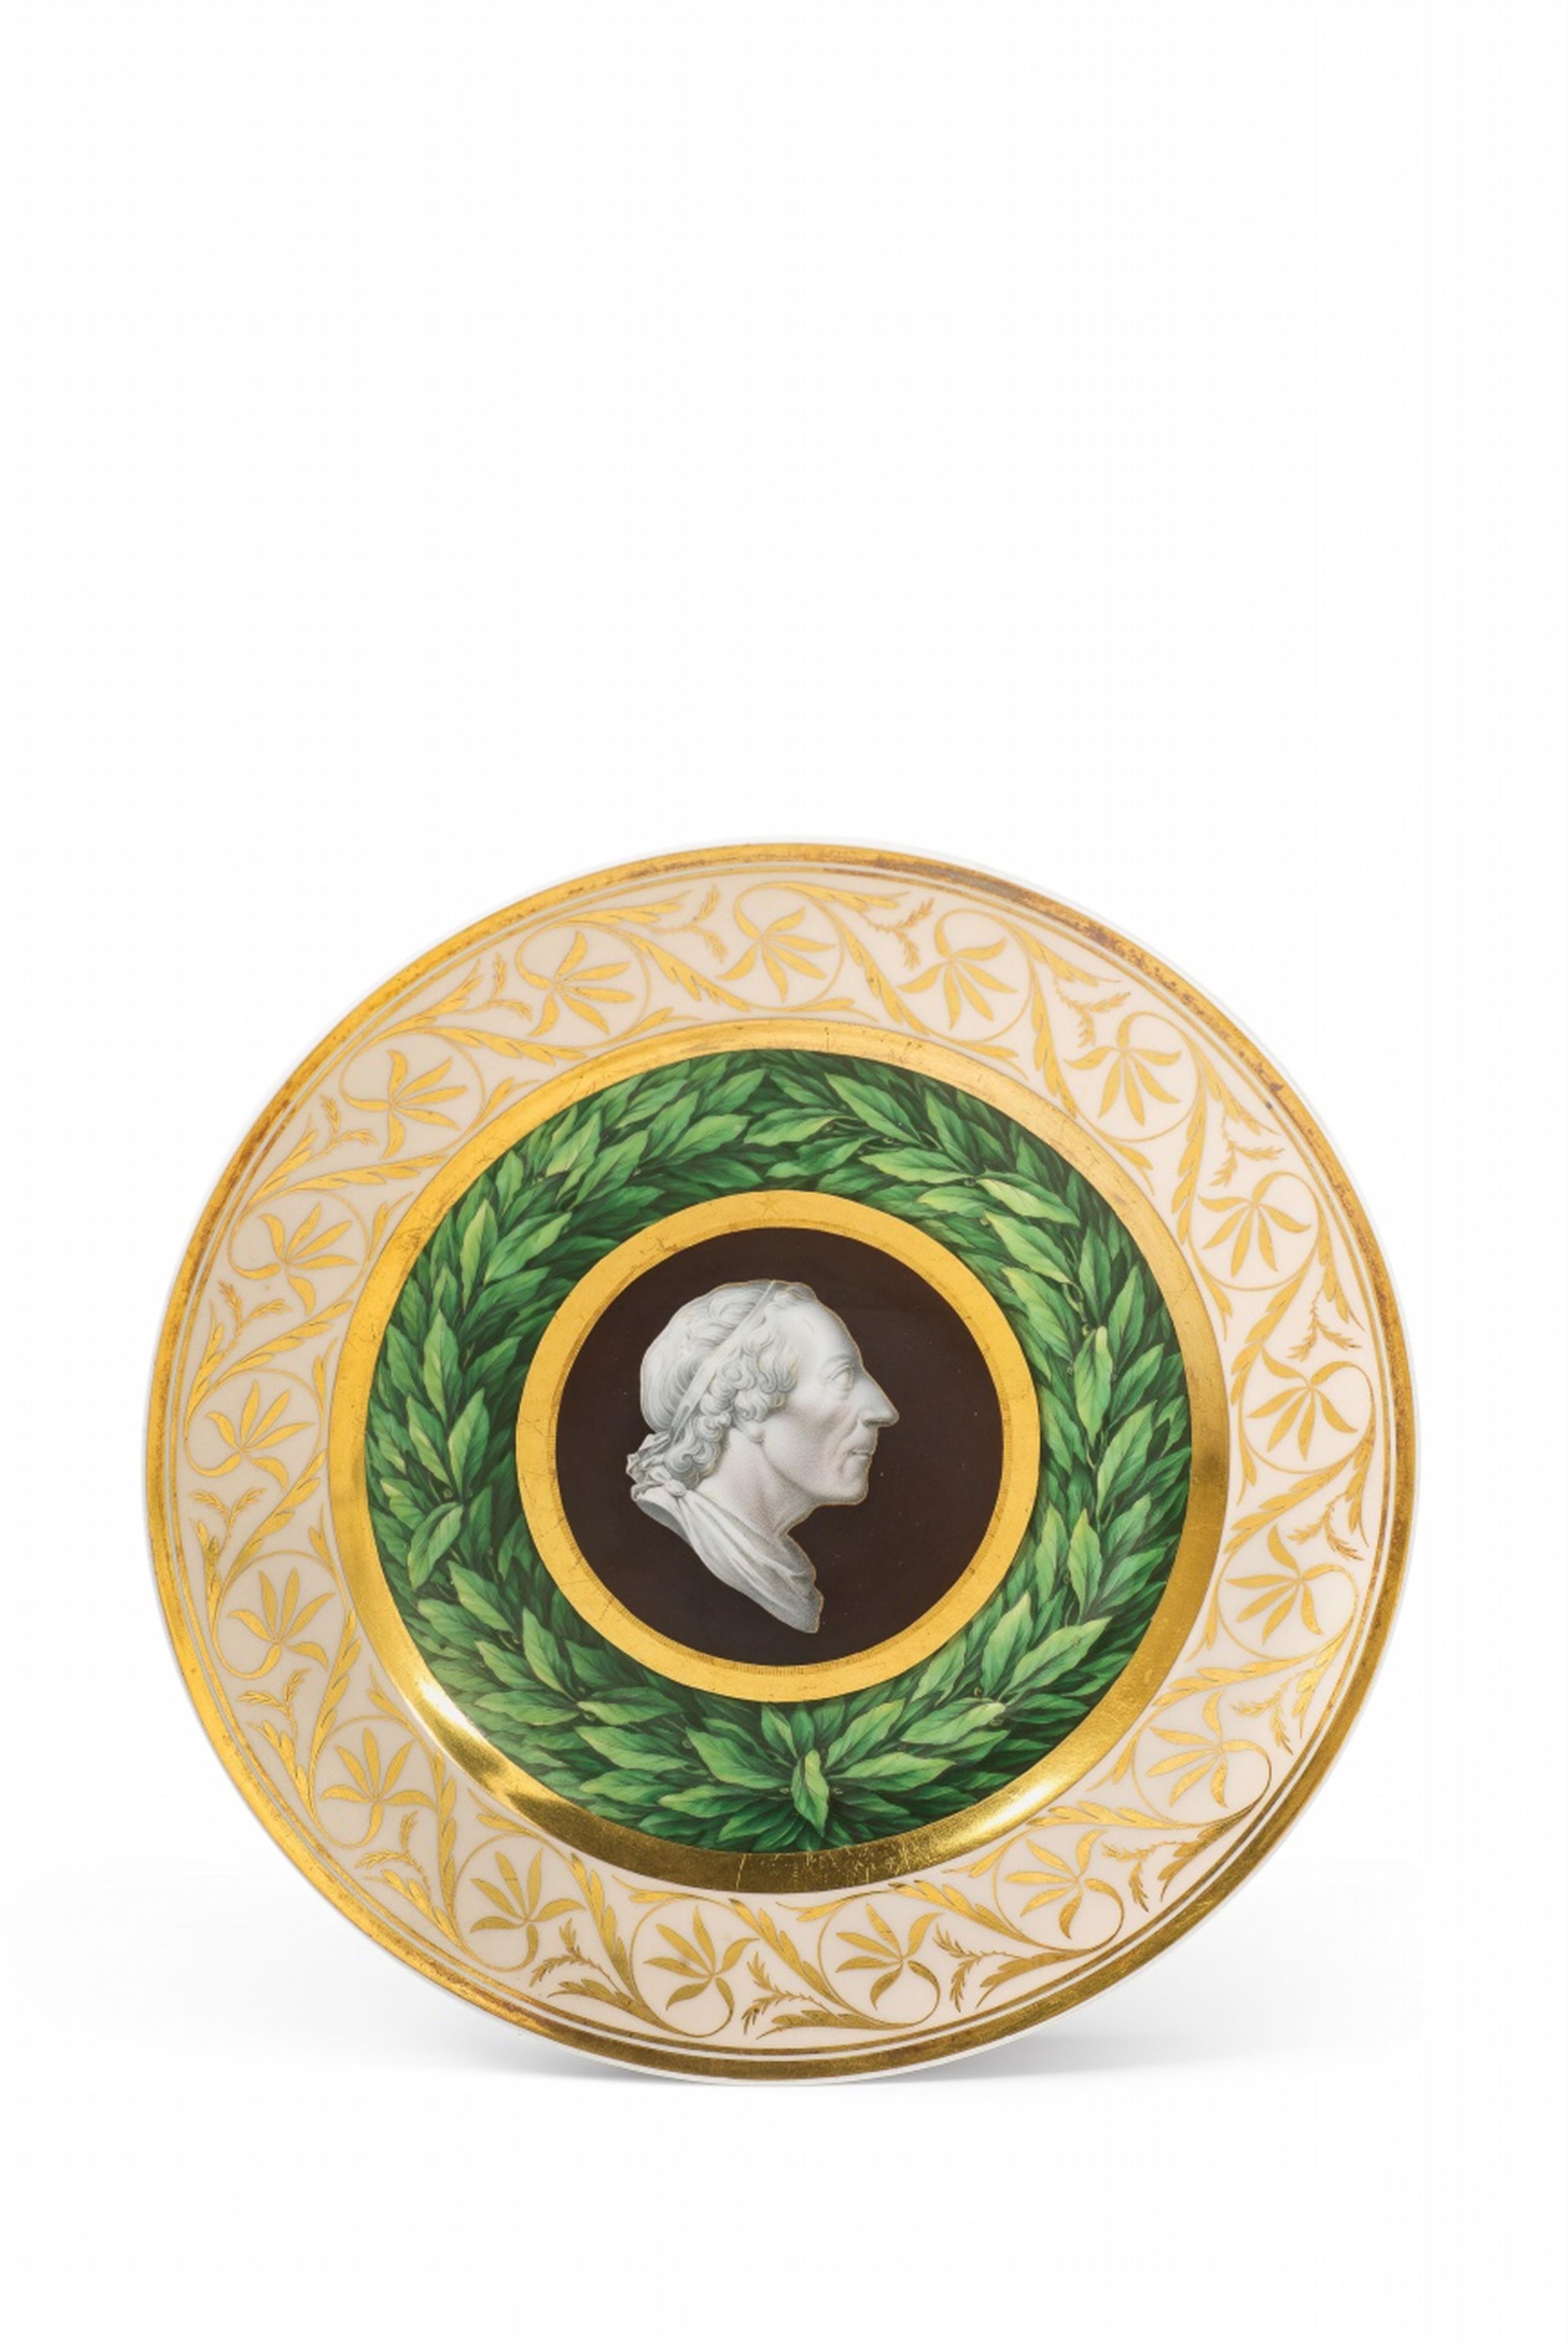 A Berlin KPM porcelain plate with a cameo portrait of King Frederick II of Prussia - image-1